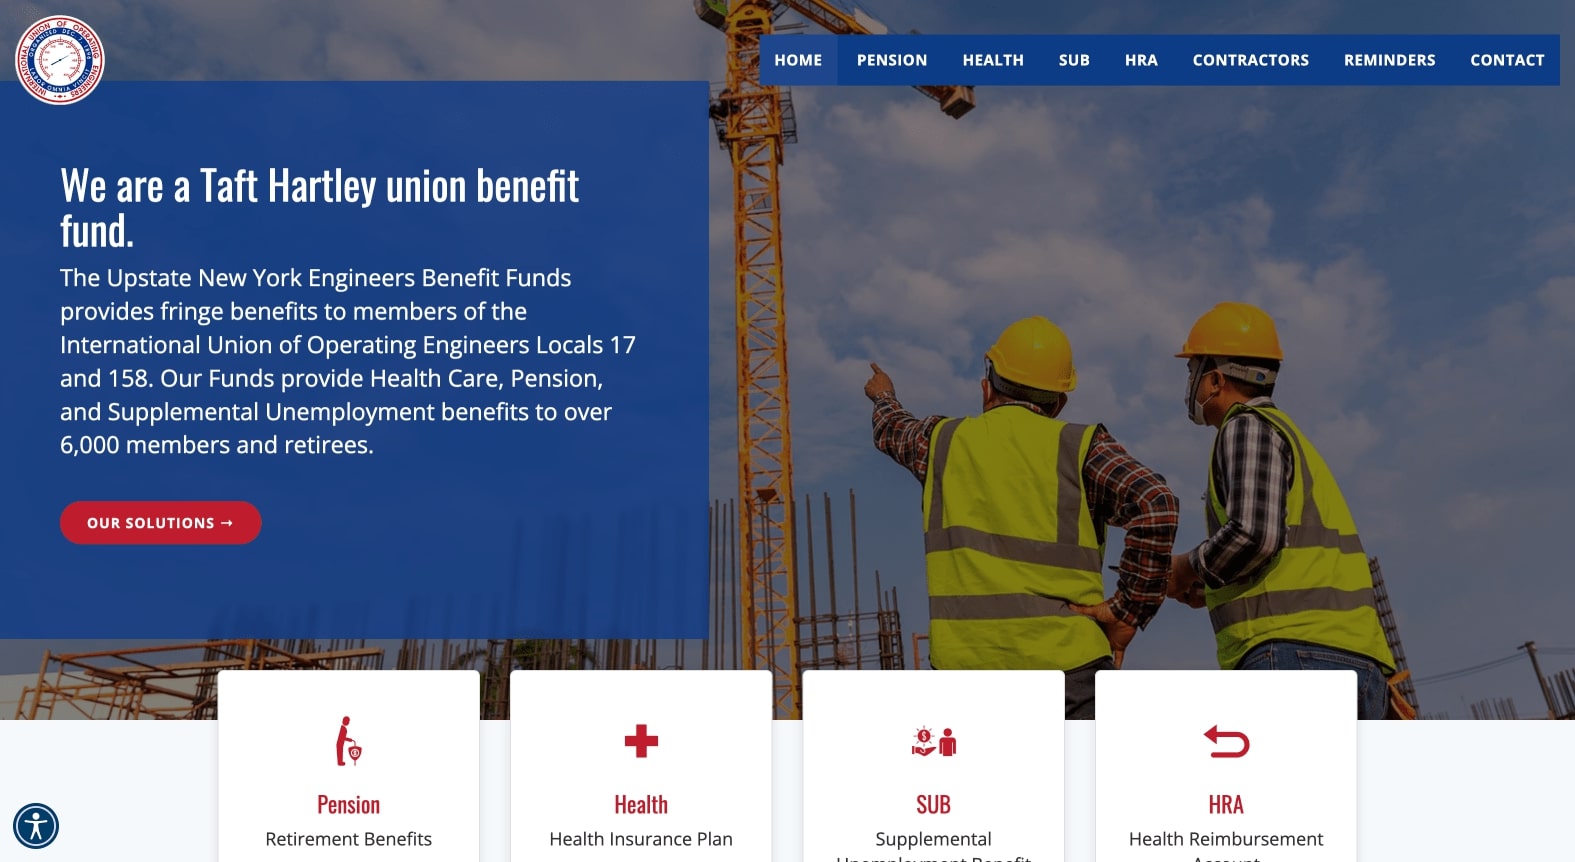 The Upstate New York Engineers Benefit Funds